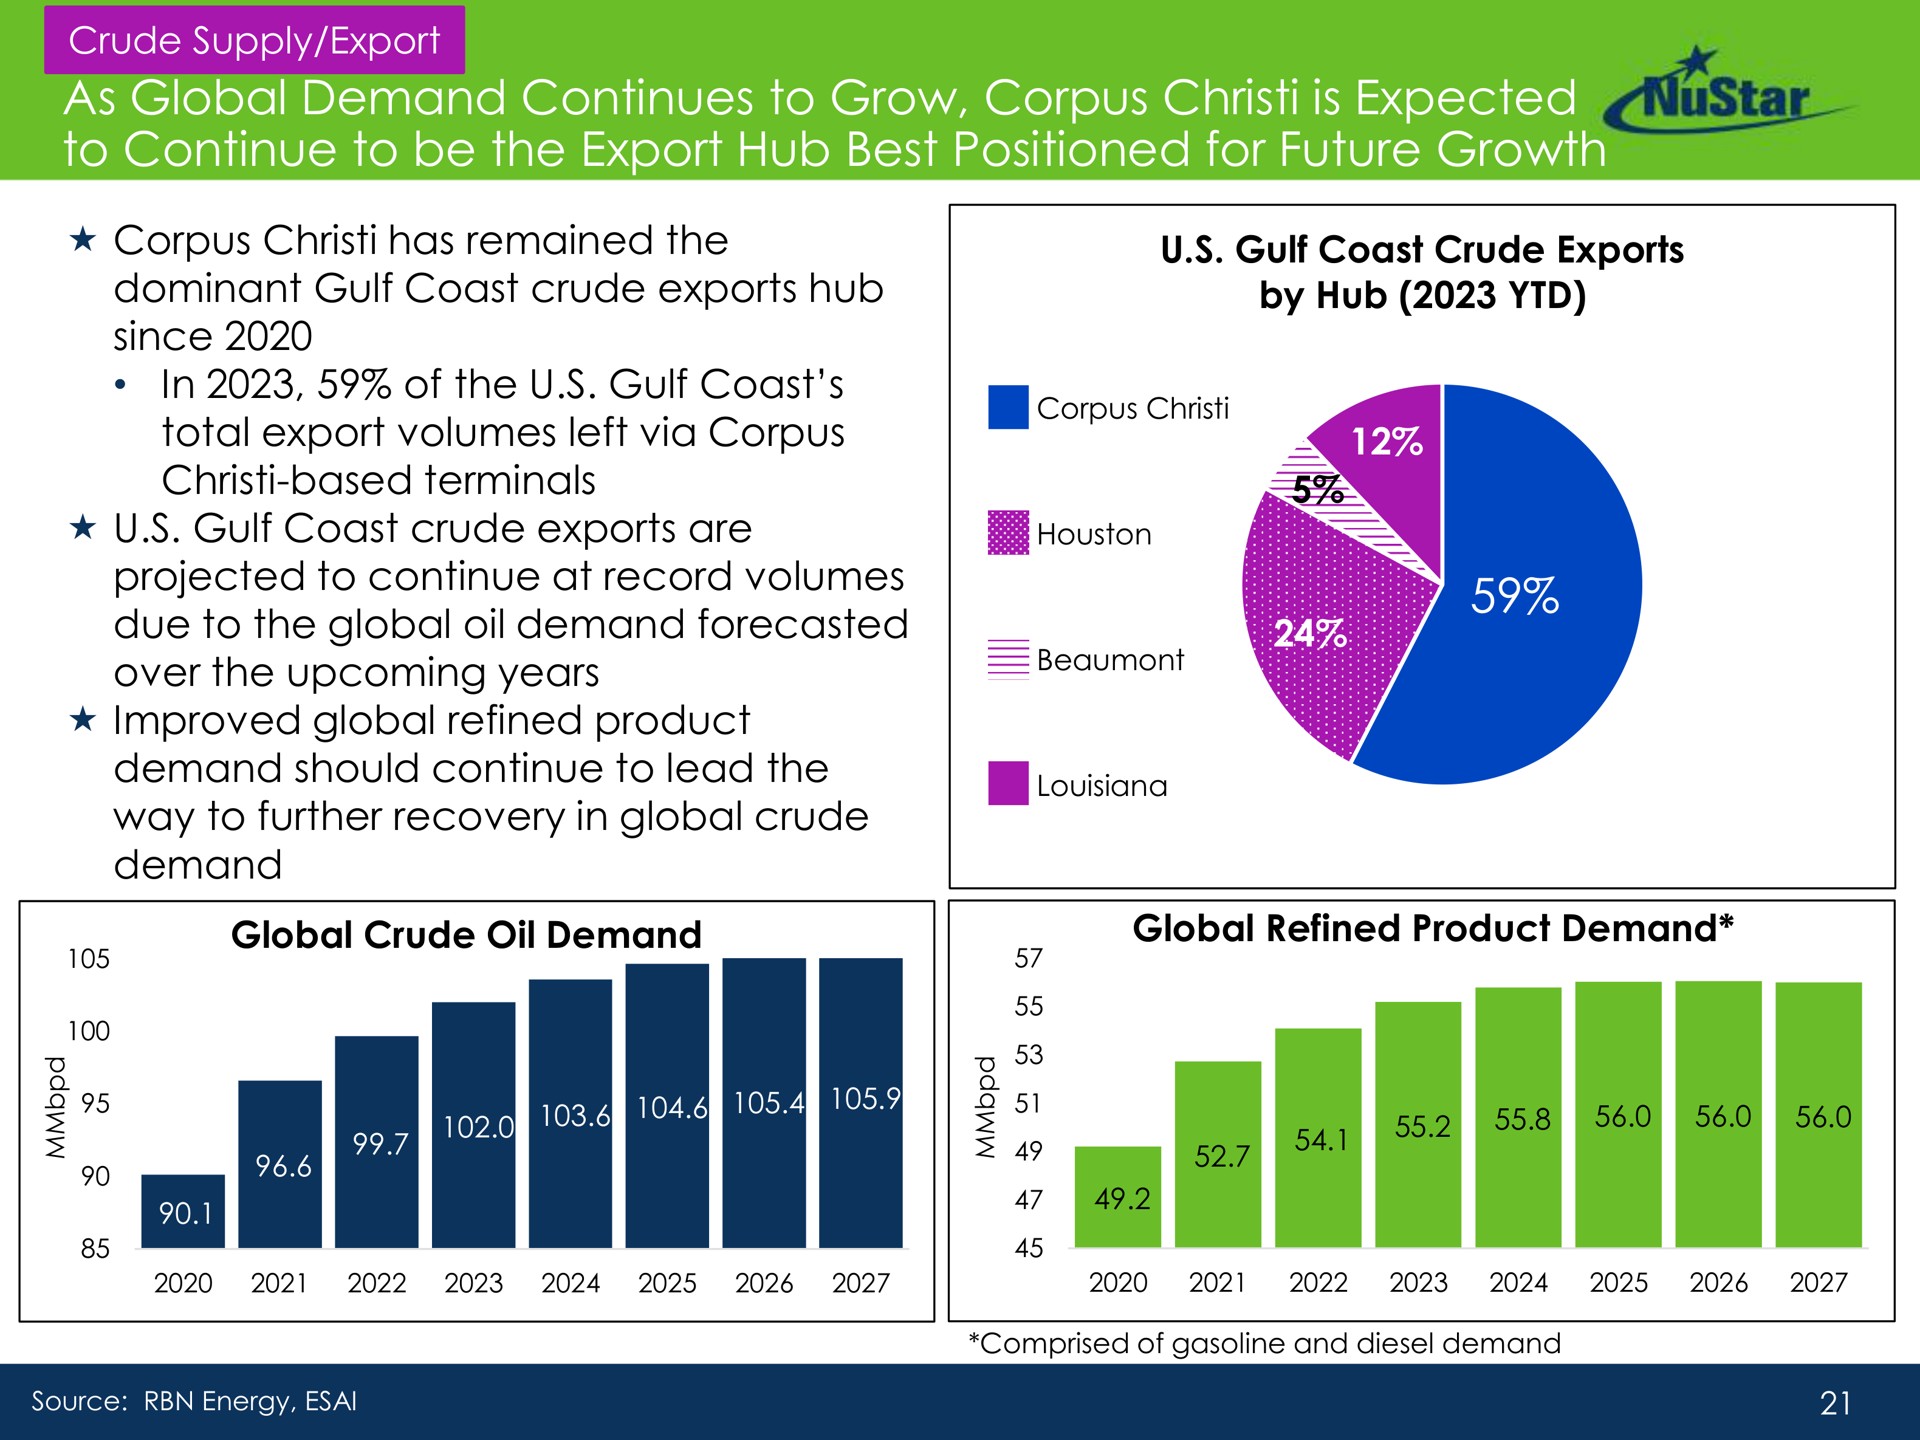 as global demand continues to grow corpus is expected to continue to be the export hub best positioned for future growth | NuStar Energy